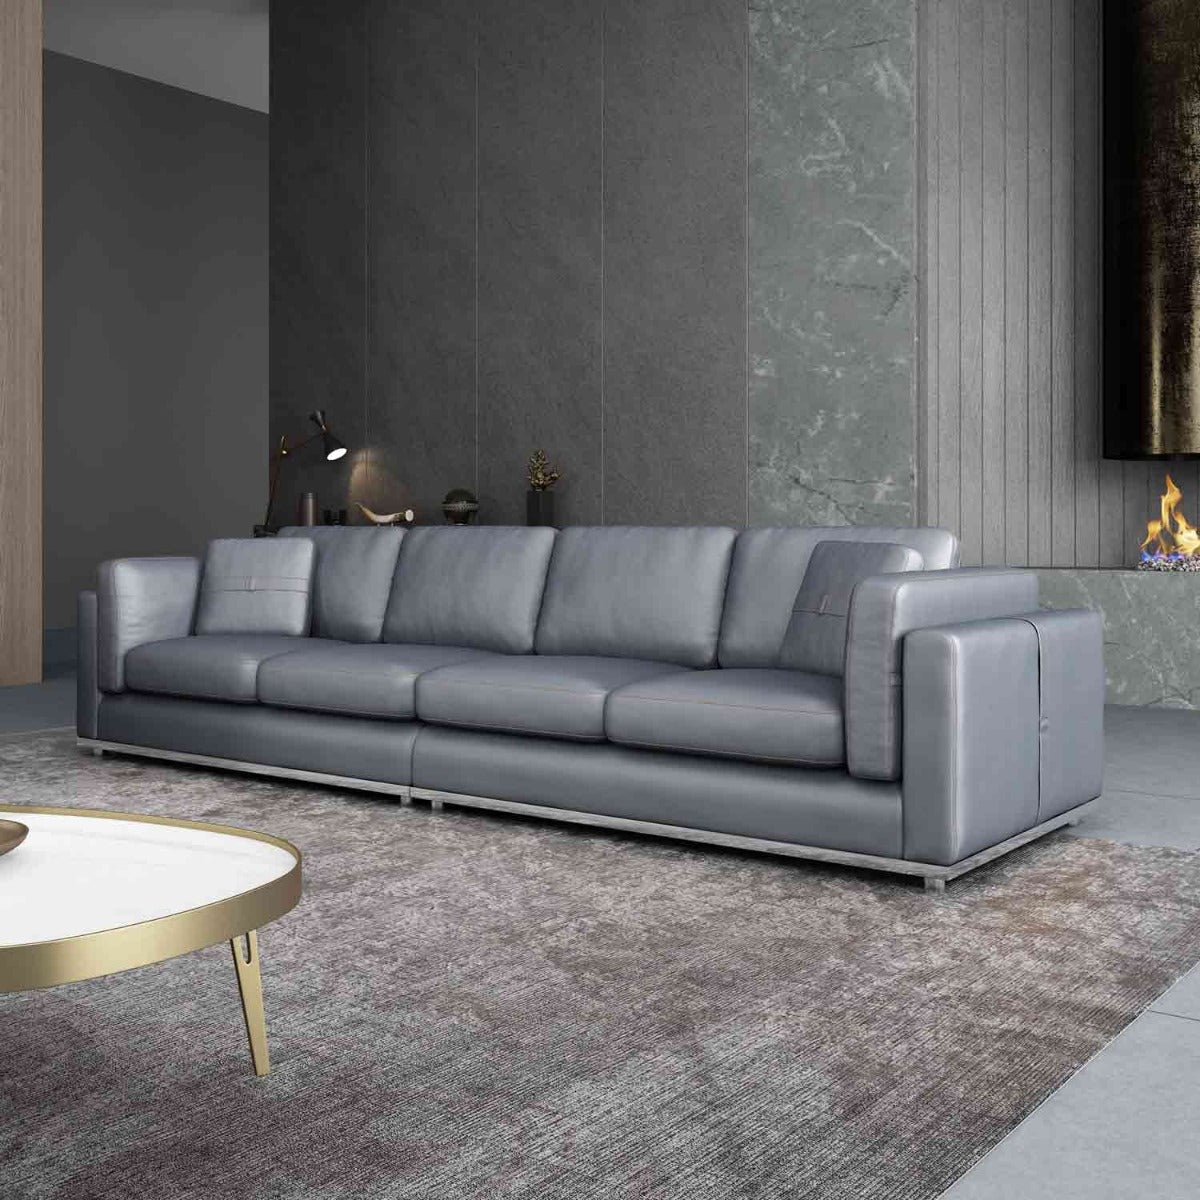 European Furniture - Picasso Oversize Sofa in Smokey Gray - 25550-4S - New Star Living